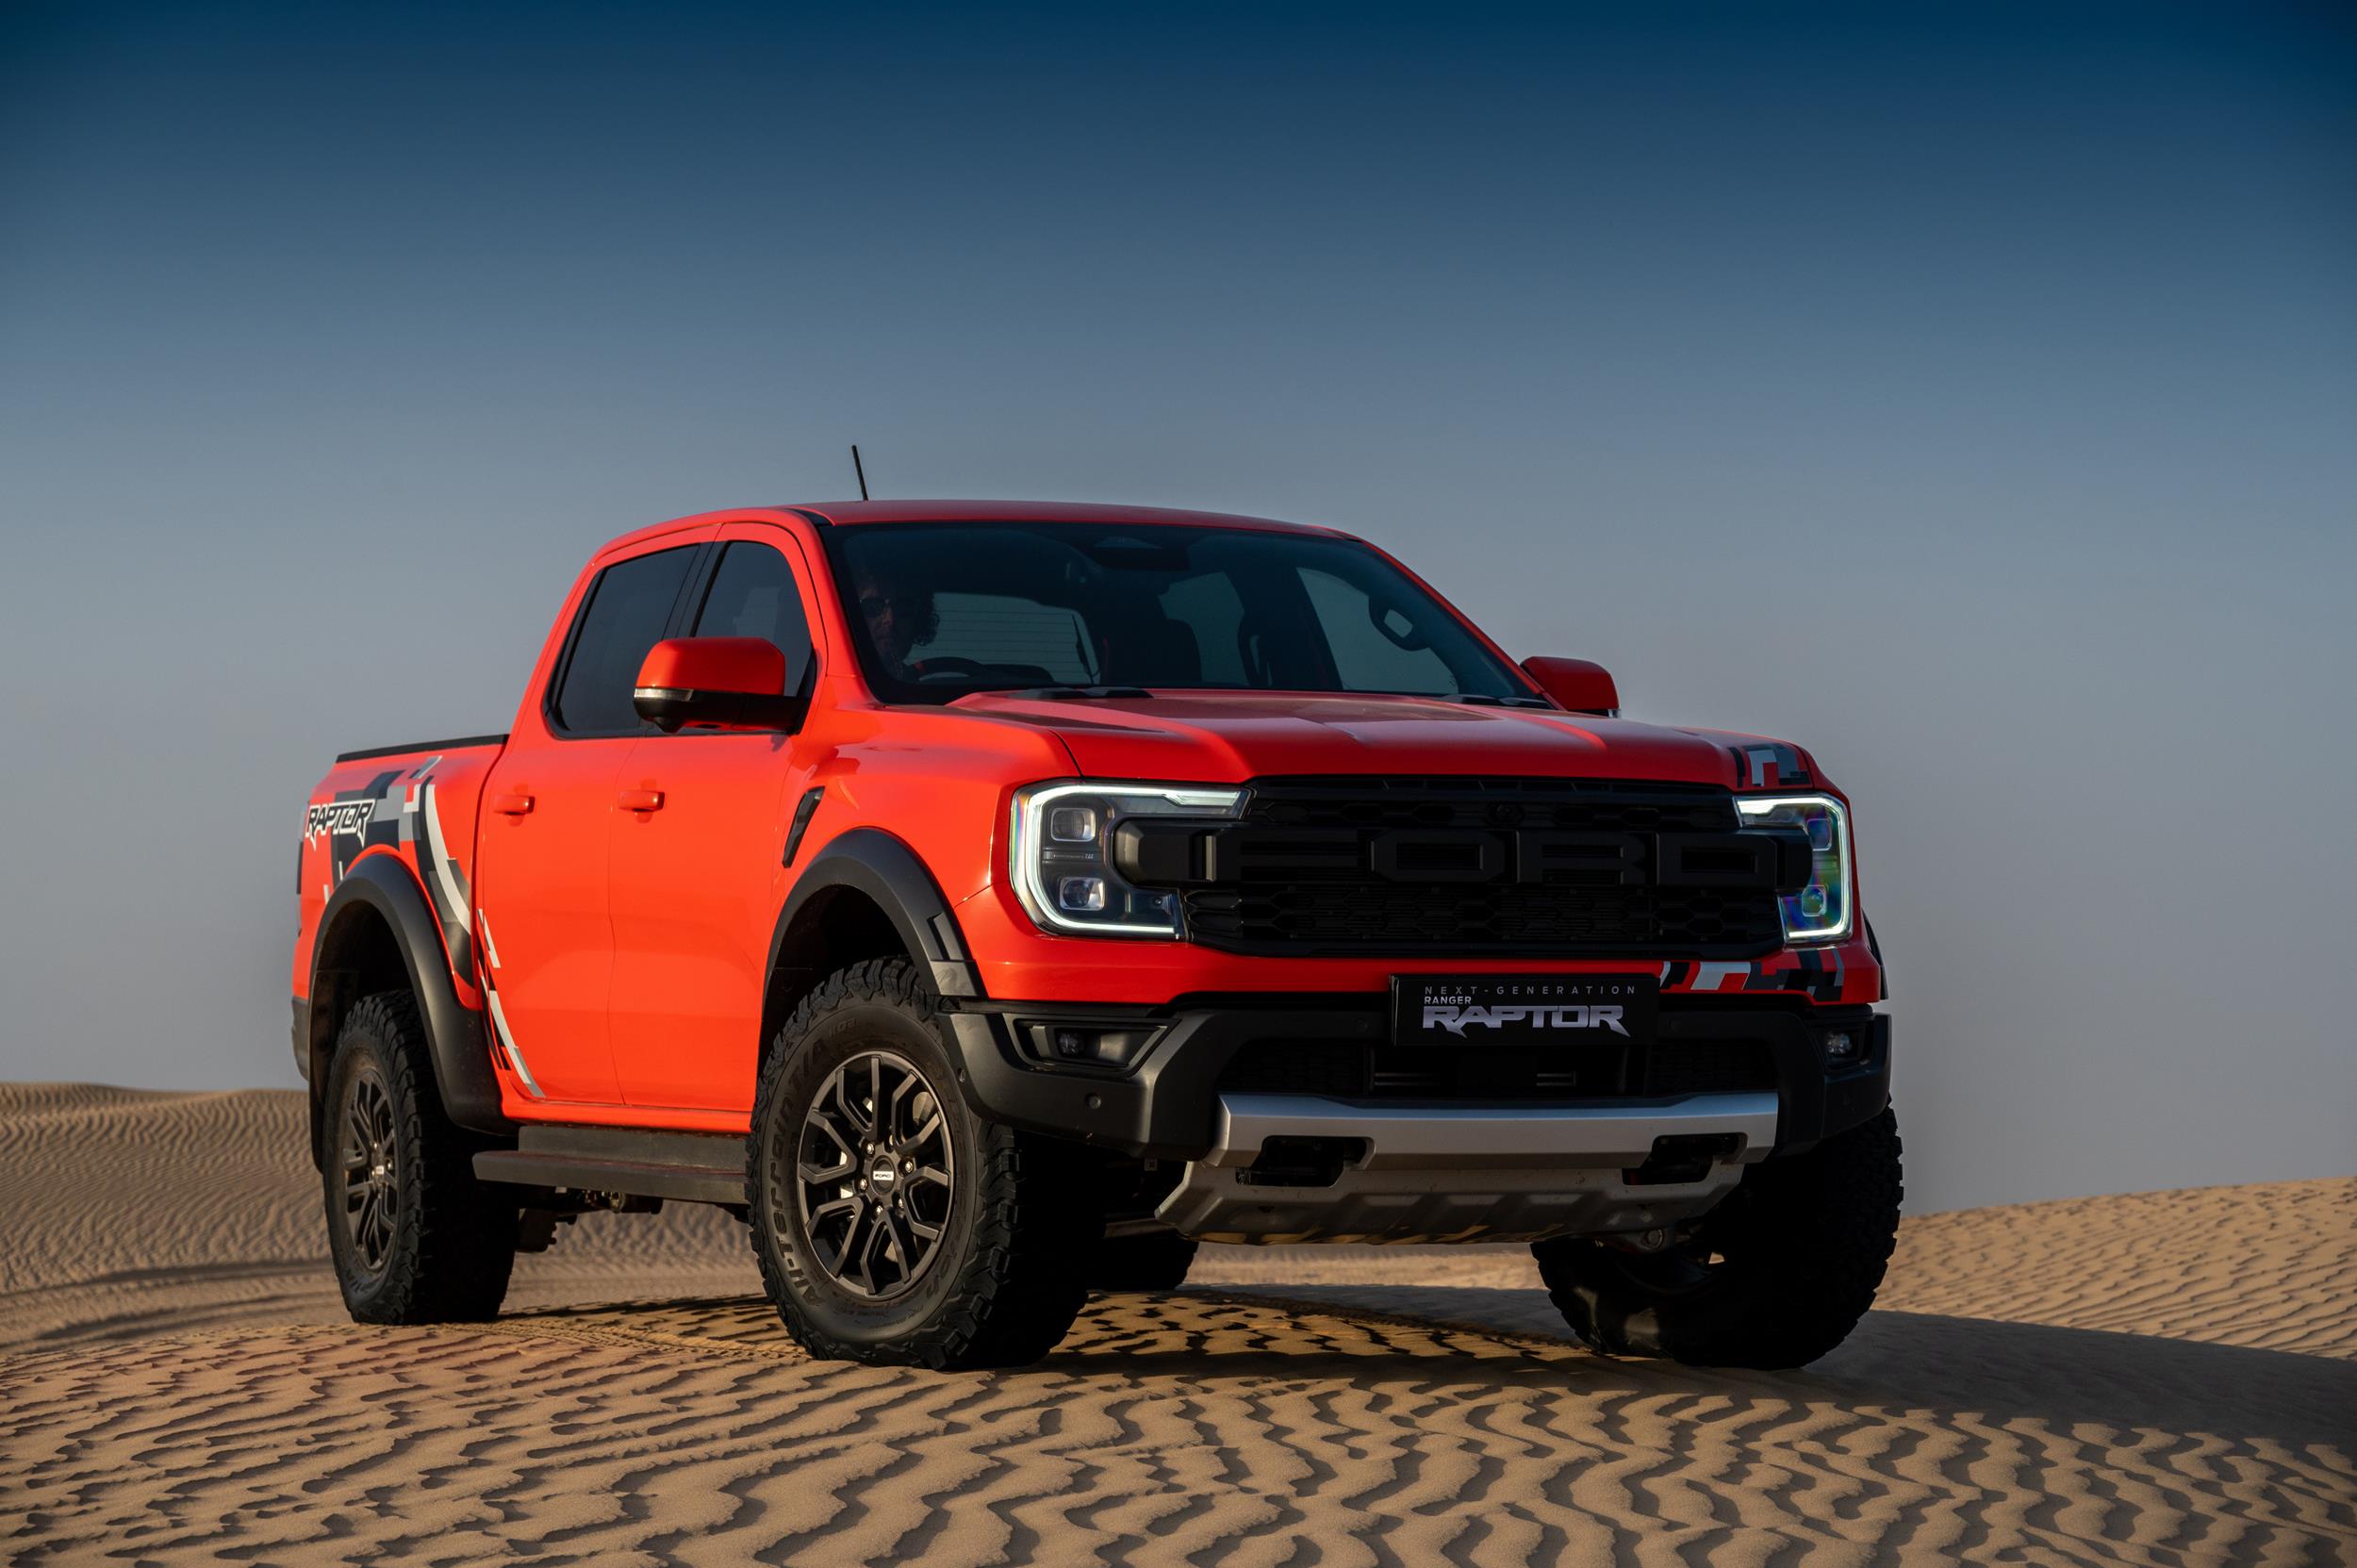 Next Gen Ford Ranger Raptor Elevates Performance And Capability To New